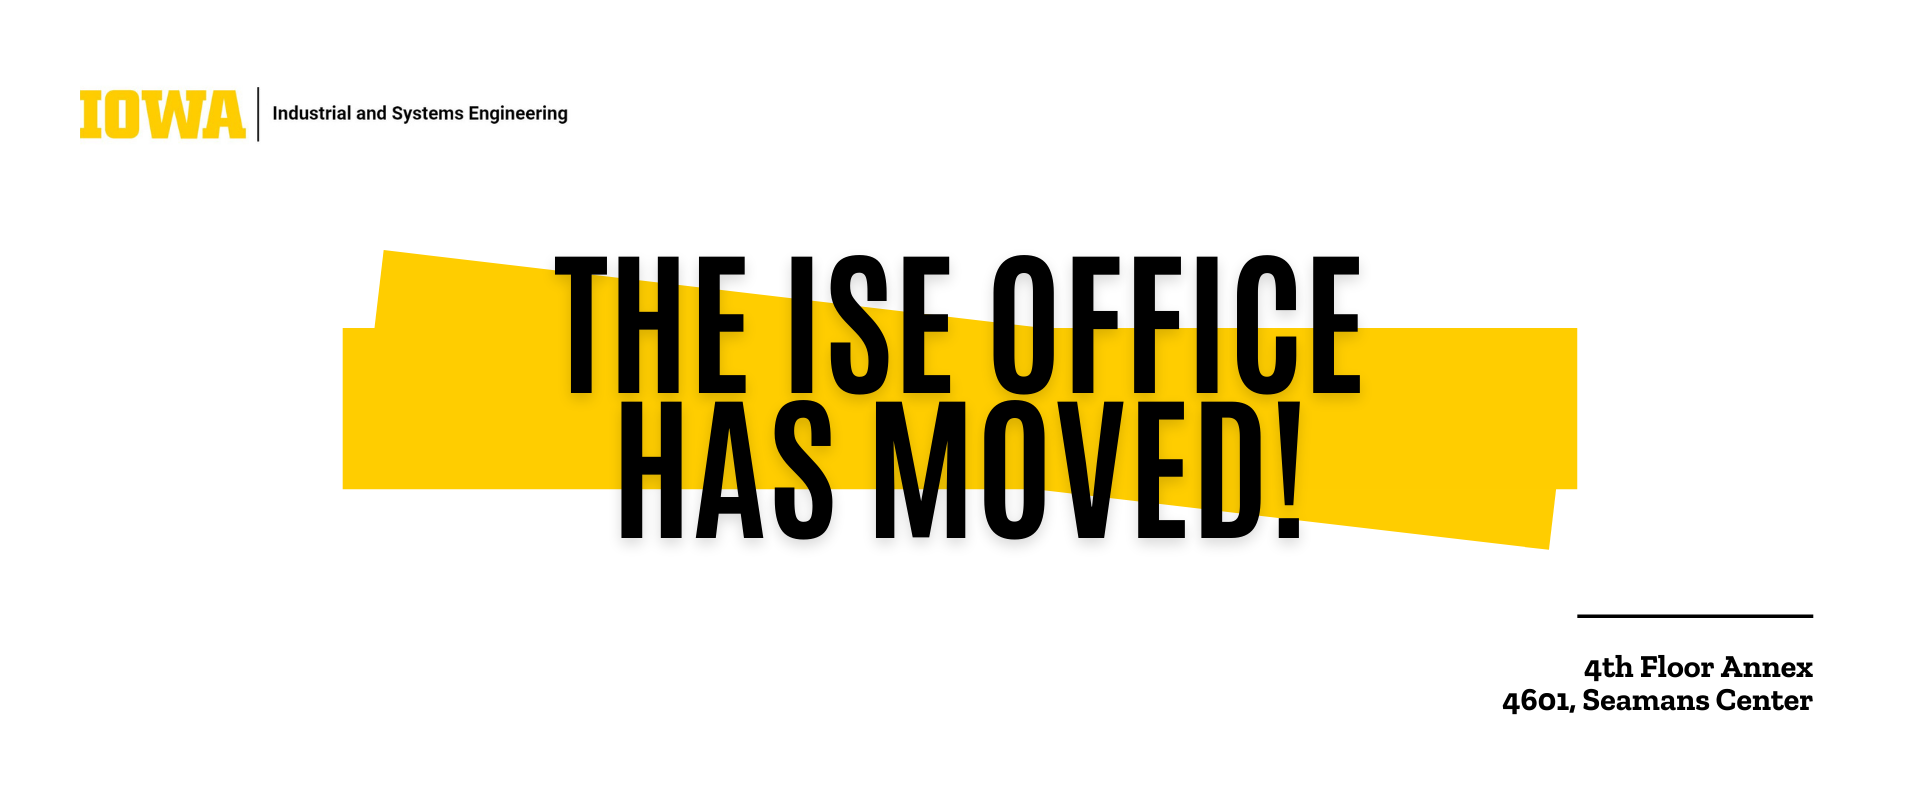 Yellow and white background. Text: "ISE Office Has Moved!"